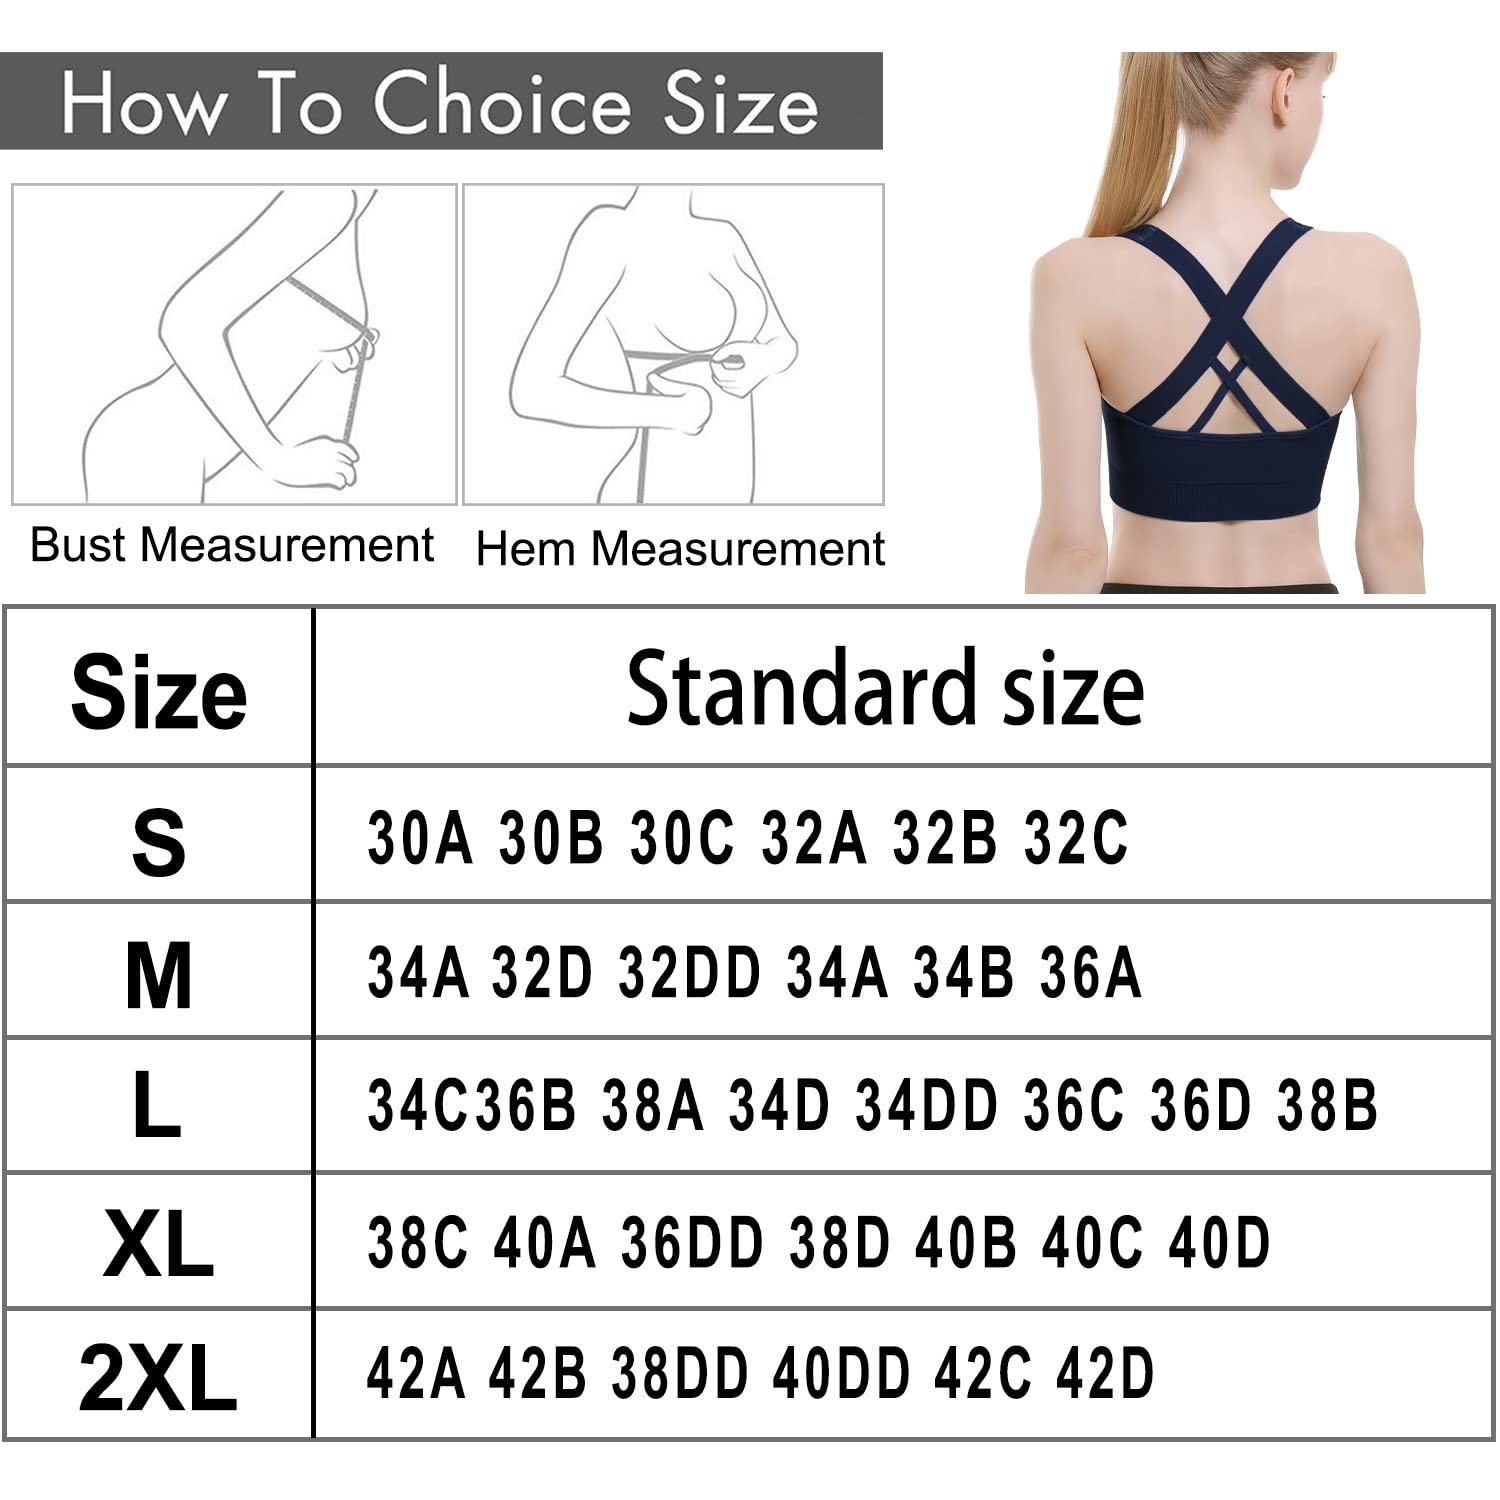 Sports Bras for Women Padded High Impact Seamless Criss Cross Back Workout Tops Gym Activewear Bra